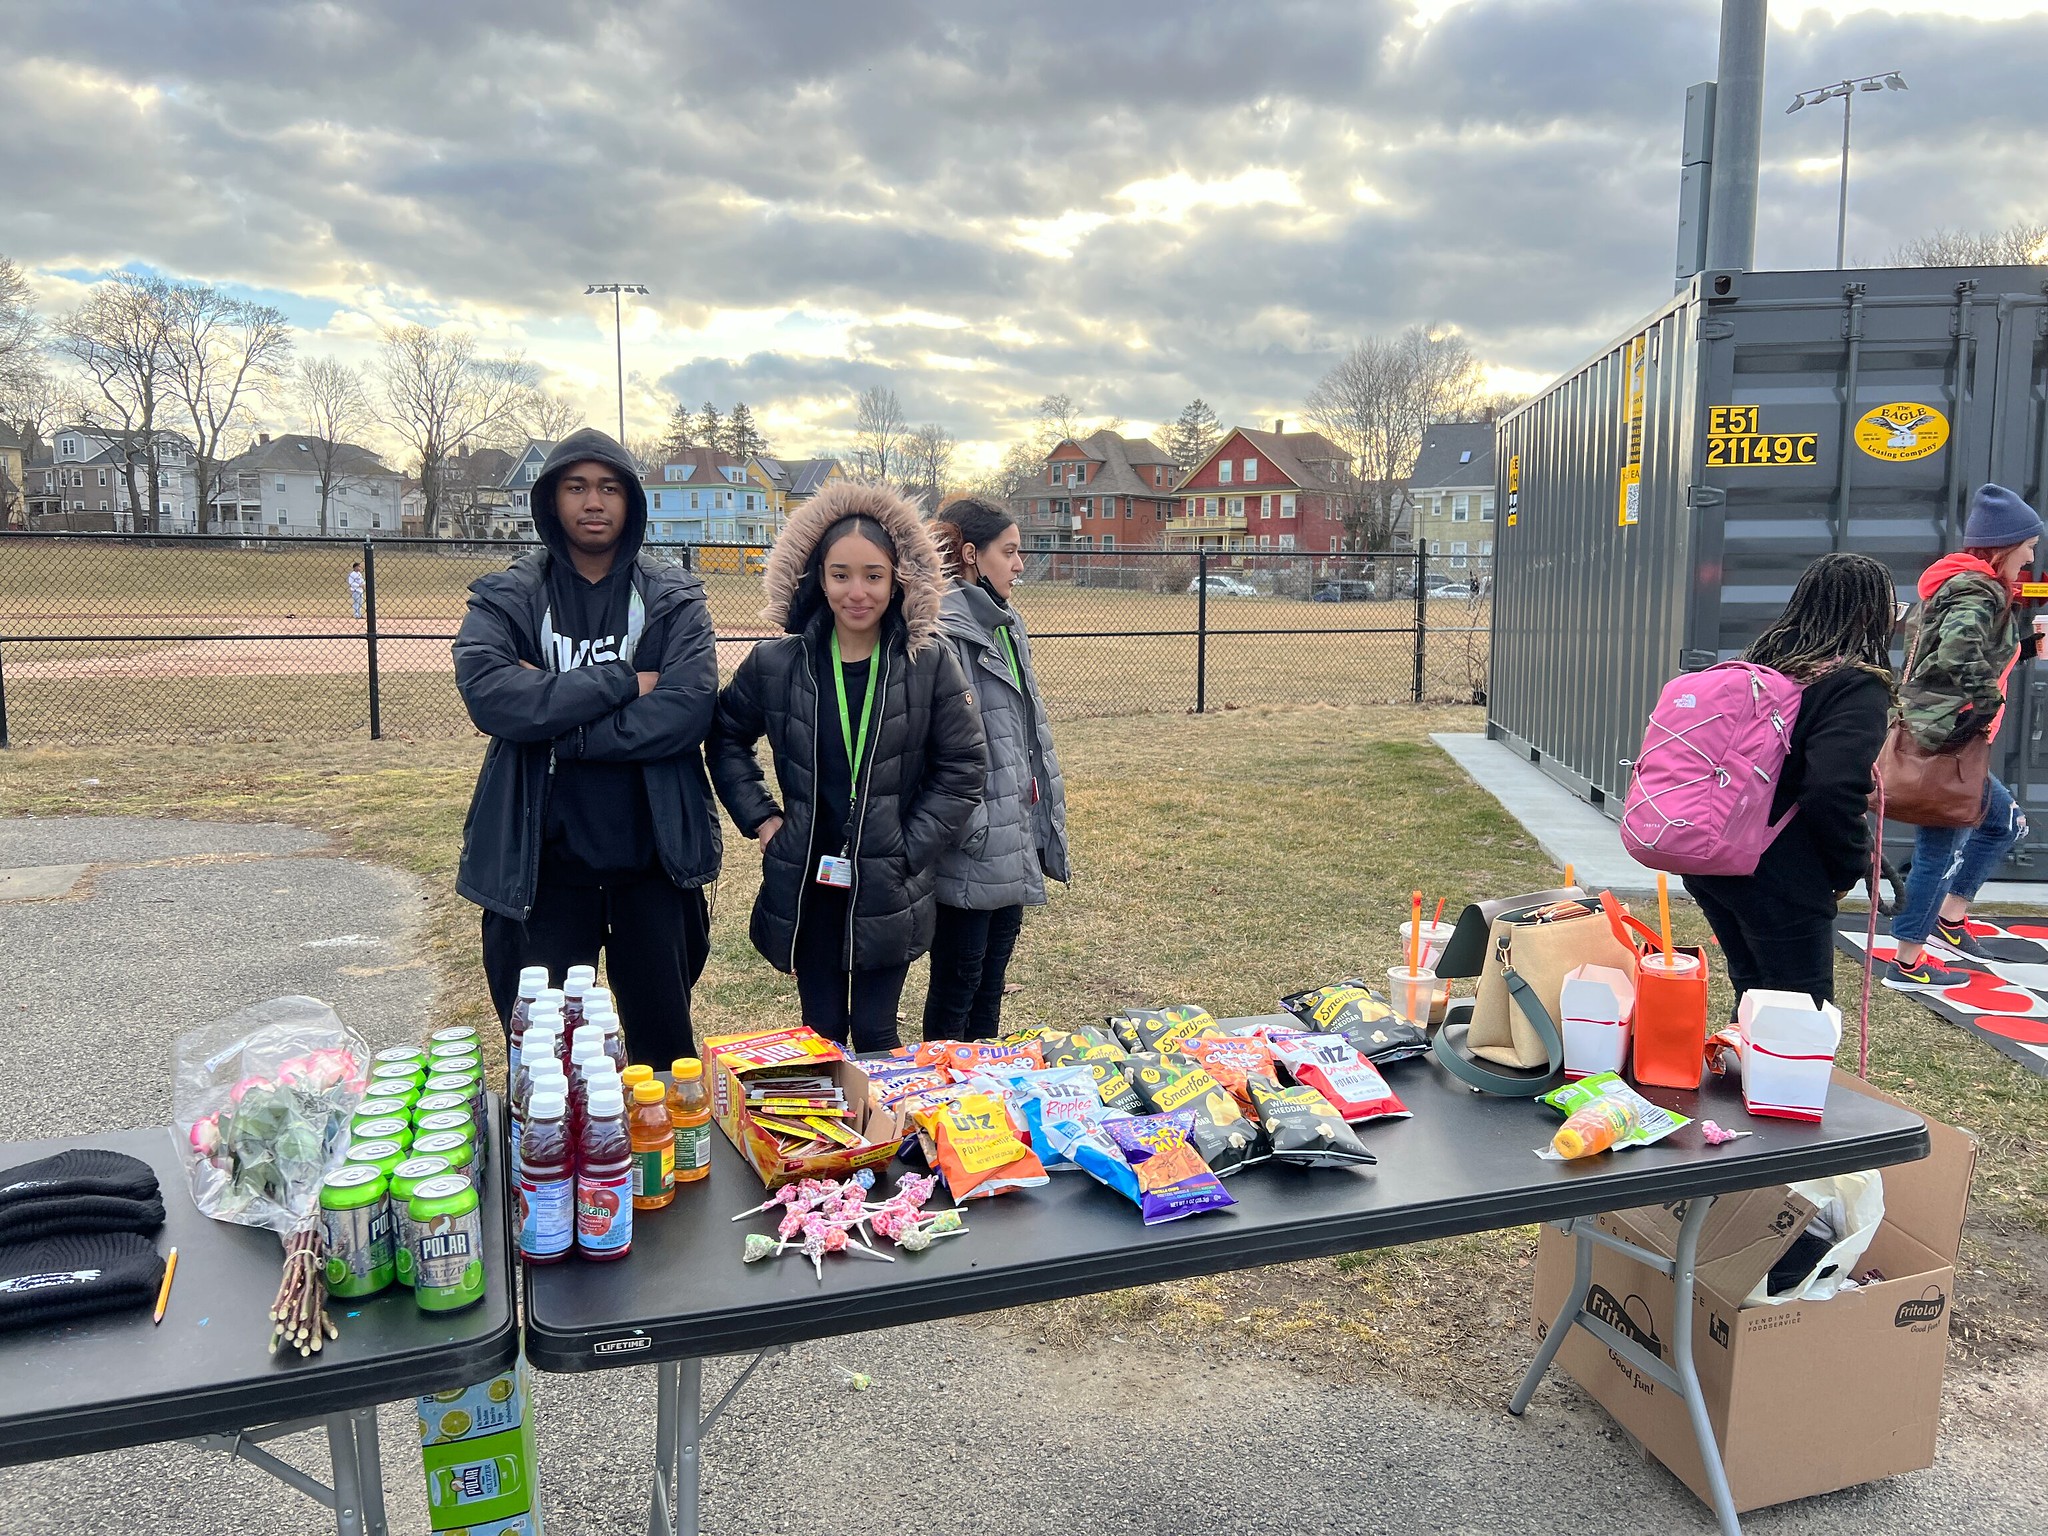 Teens from Fields Corner Crossroads Collaboration provide snacks for the event.